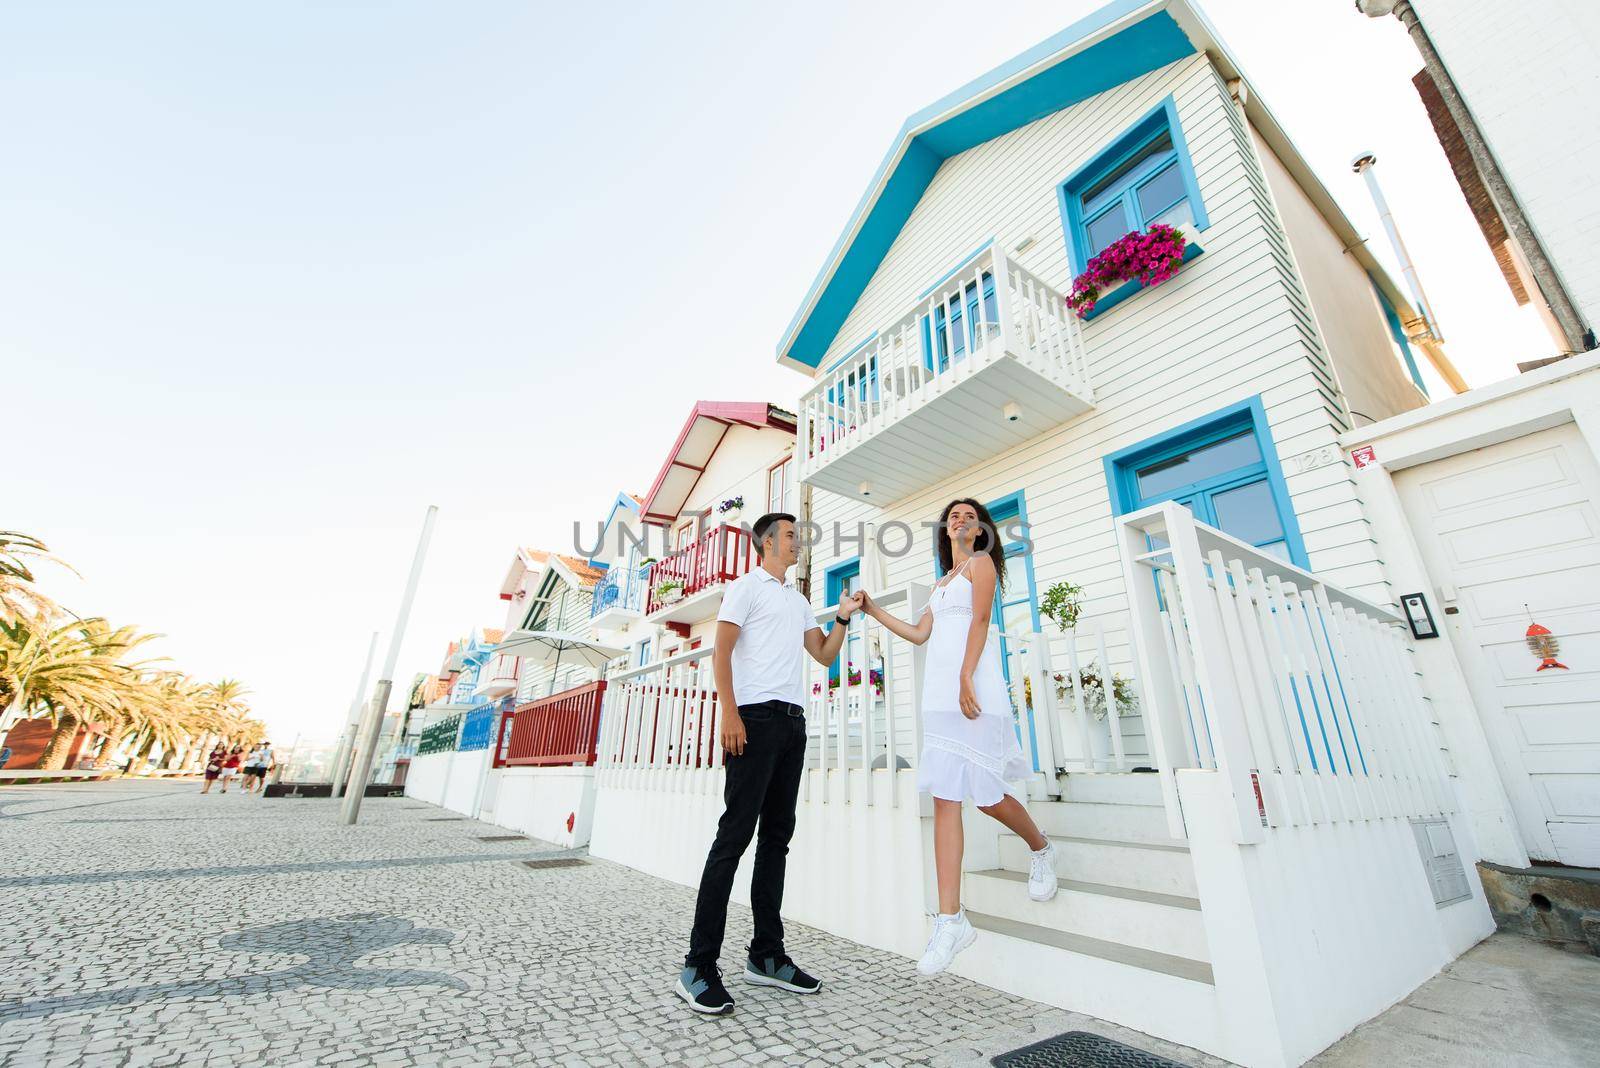 Young couple in white clothes walks around street in Aveiro, Portugal near colourful and peaceful houses. Lifestyle. Having fun, laughs, smiles by Rabizo